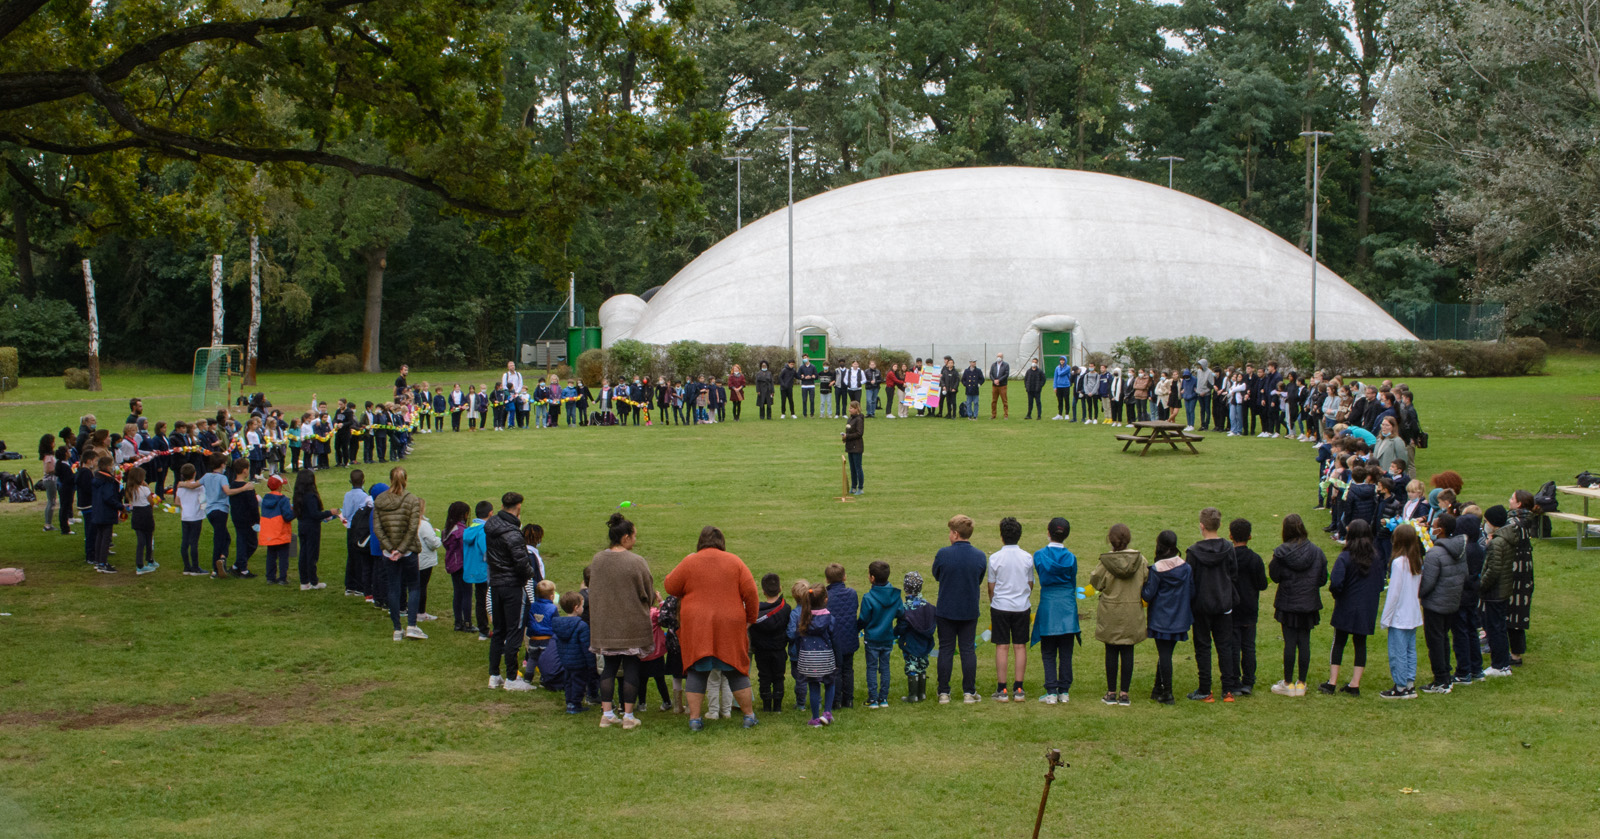 All members of SIS Berlin are standing on the lawn, forming a large circle, some of them holding a handmade paper chain. In the background you can see a white dome.